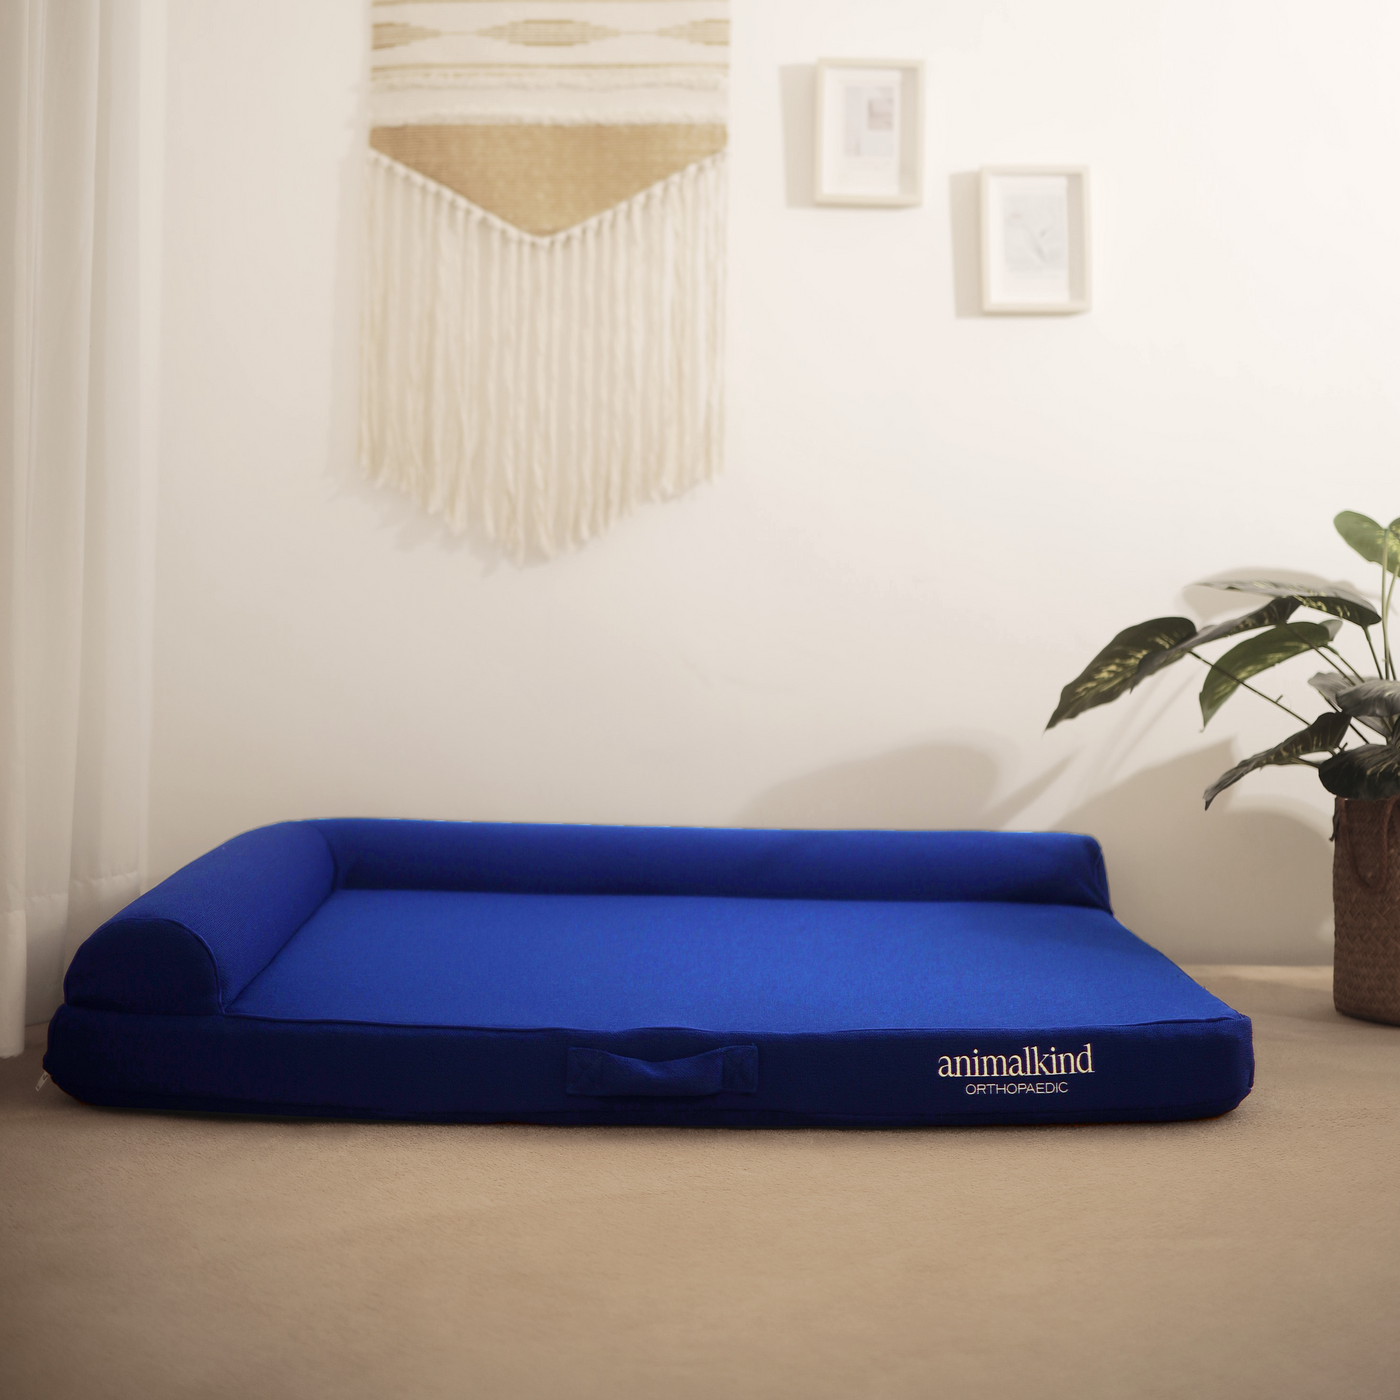 Animalkind Orthopaedic Pet Bed with L-Shaped Pillow (Royal Blue)